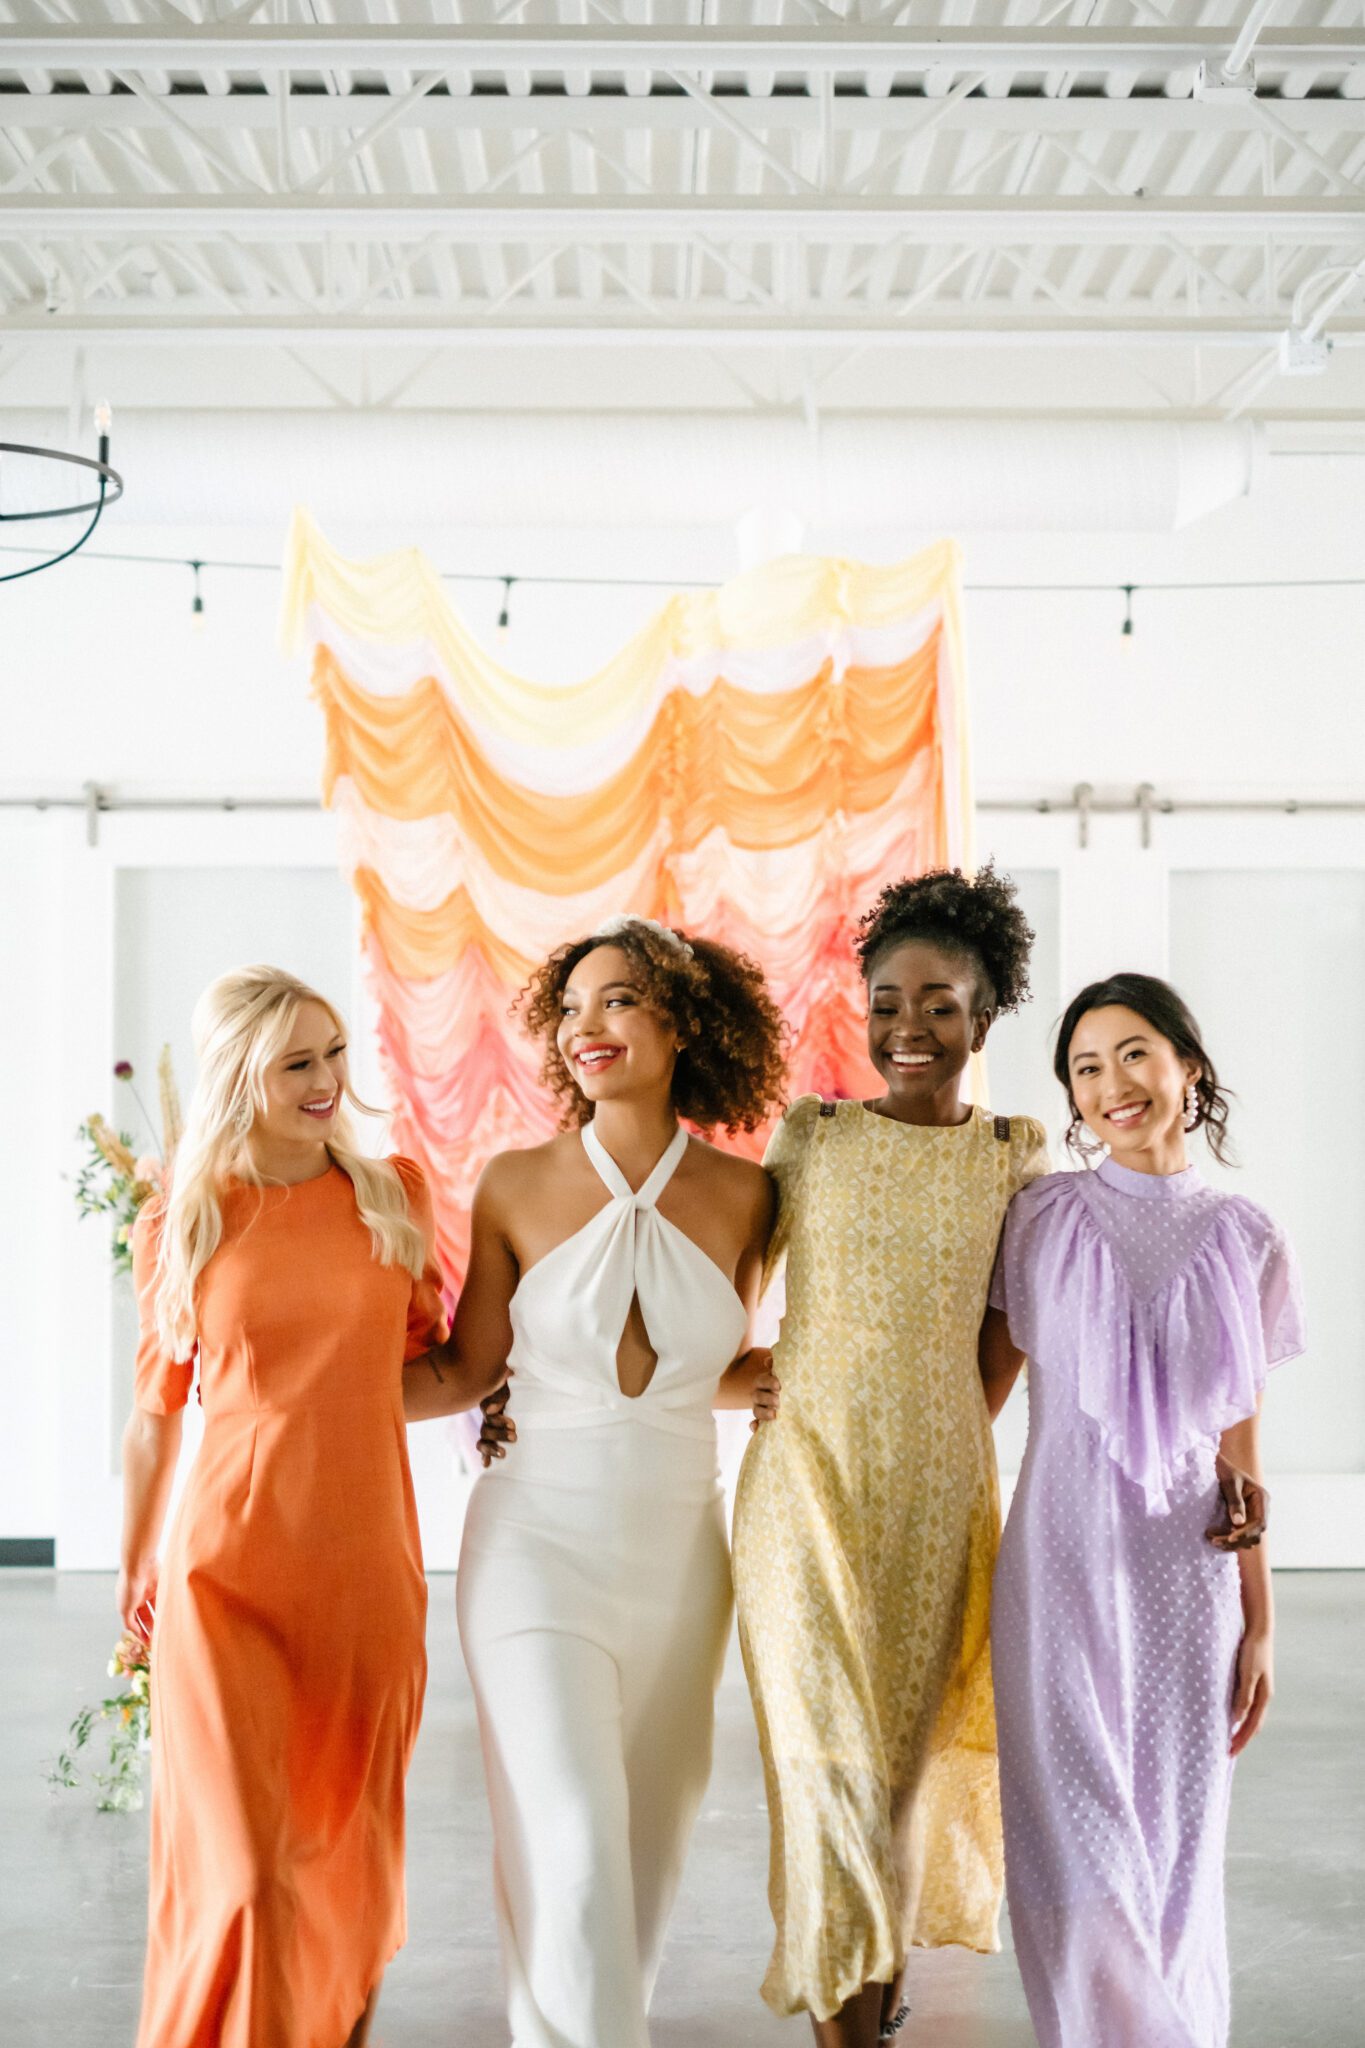 Bright & Colourful Brunch Wedding Inspiration at The Brownstone Calgary, Bronte Bride. Retro-inspired vibrant colour palette of purple, orange, yellow, peach, tangerine and coral. Geometric hanging installation over the tables. Retro-inspired bridal jumpsuit and colourful bridesmaid dresses. 
